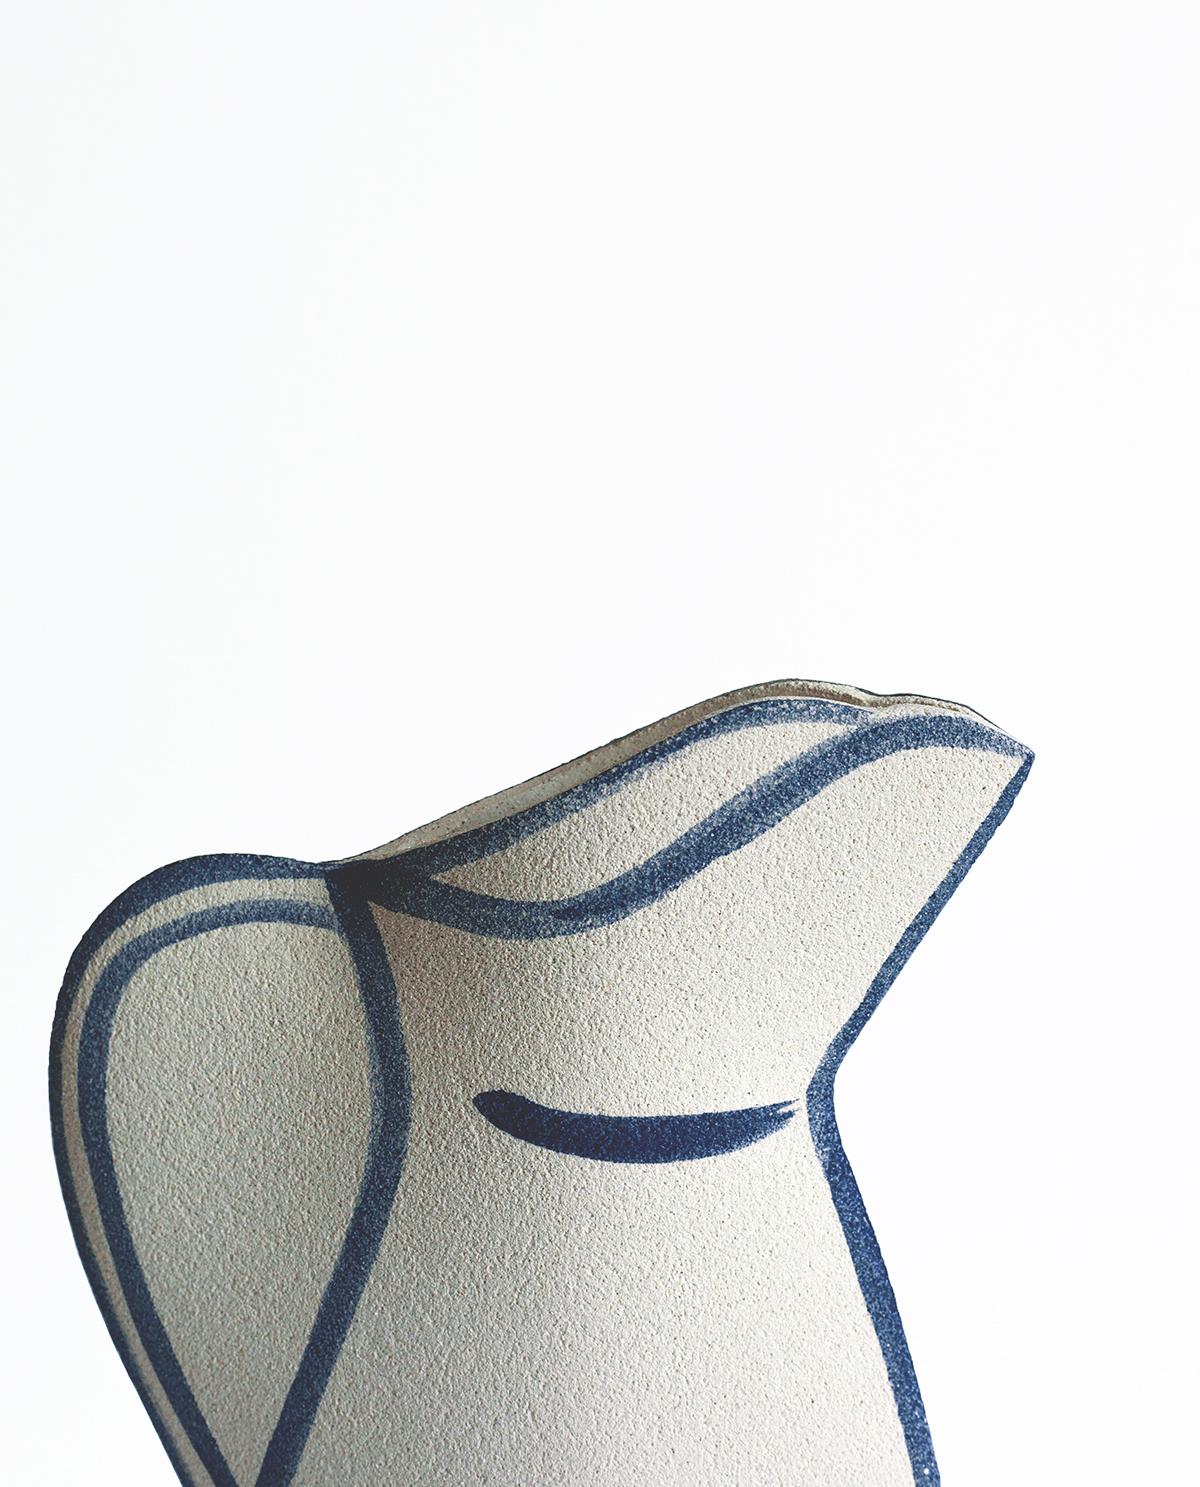 Minimalist 21st Century ‘Morandi Pitcher - Blue’, in White Ceramic, Hand-Crafted in France For Sale